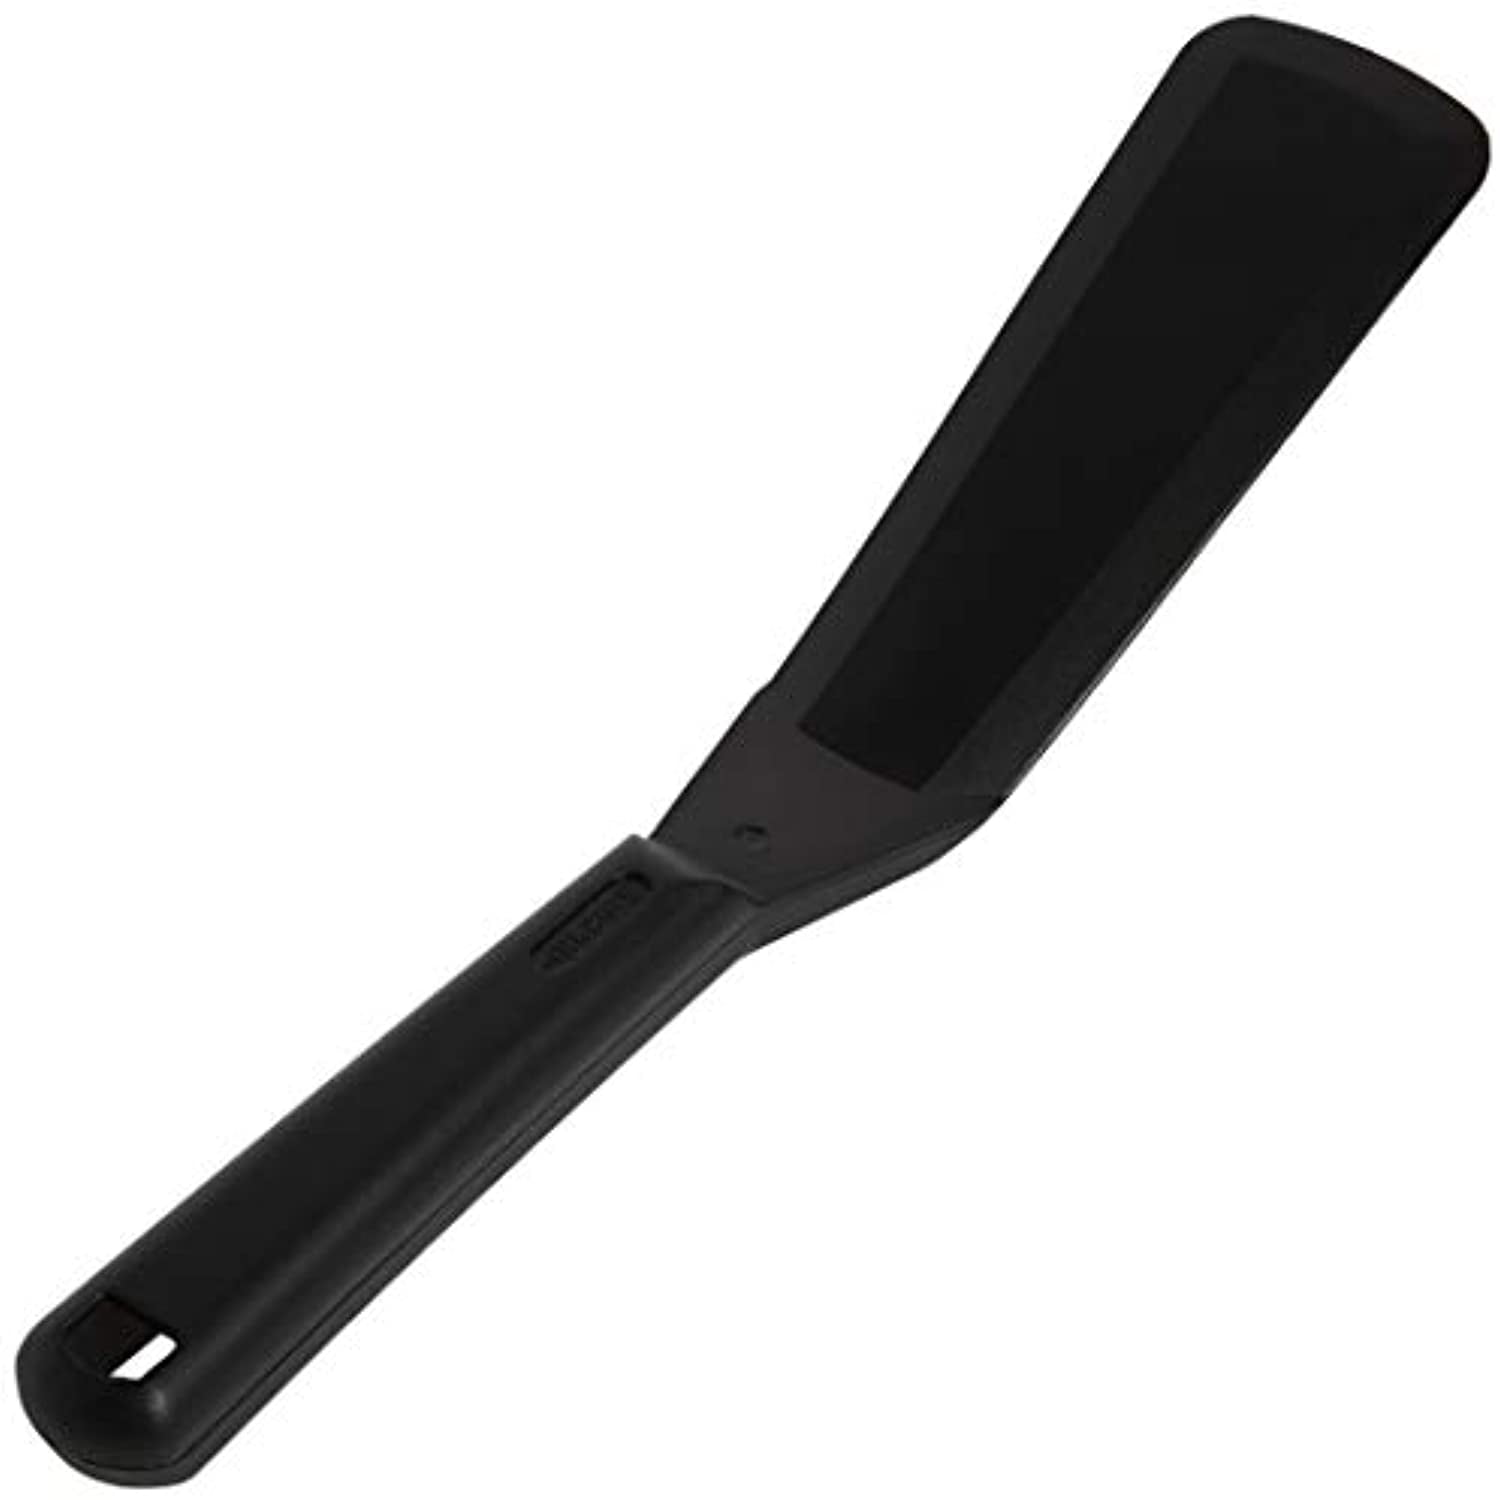 Papaba Silicone Non-Stick Egg Fish Frying Pan Scoop Spoon Shovel Turner Cooking Utensil, Size: One size, Black